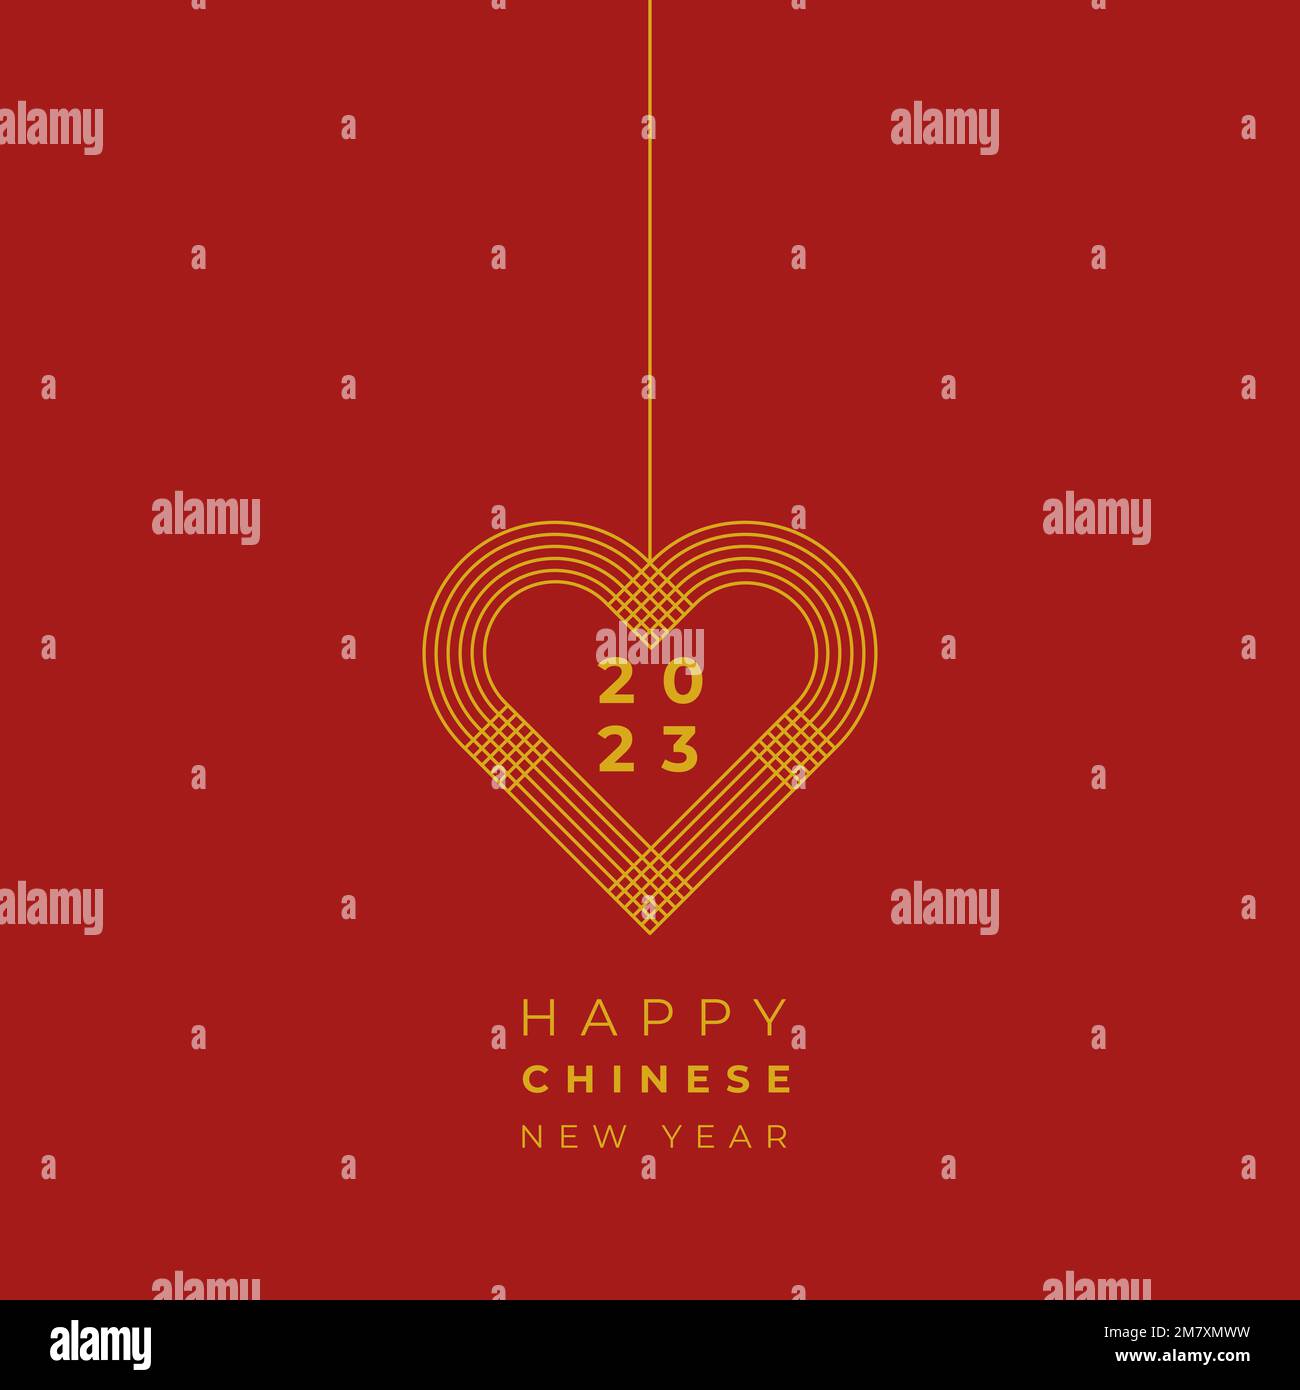 Happy Chinese New Year. Year of the rabbit. 2023. Heart shape. Vector illustration, flat design Stock Vector